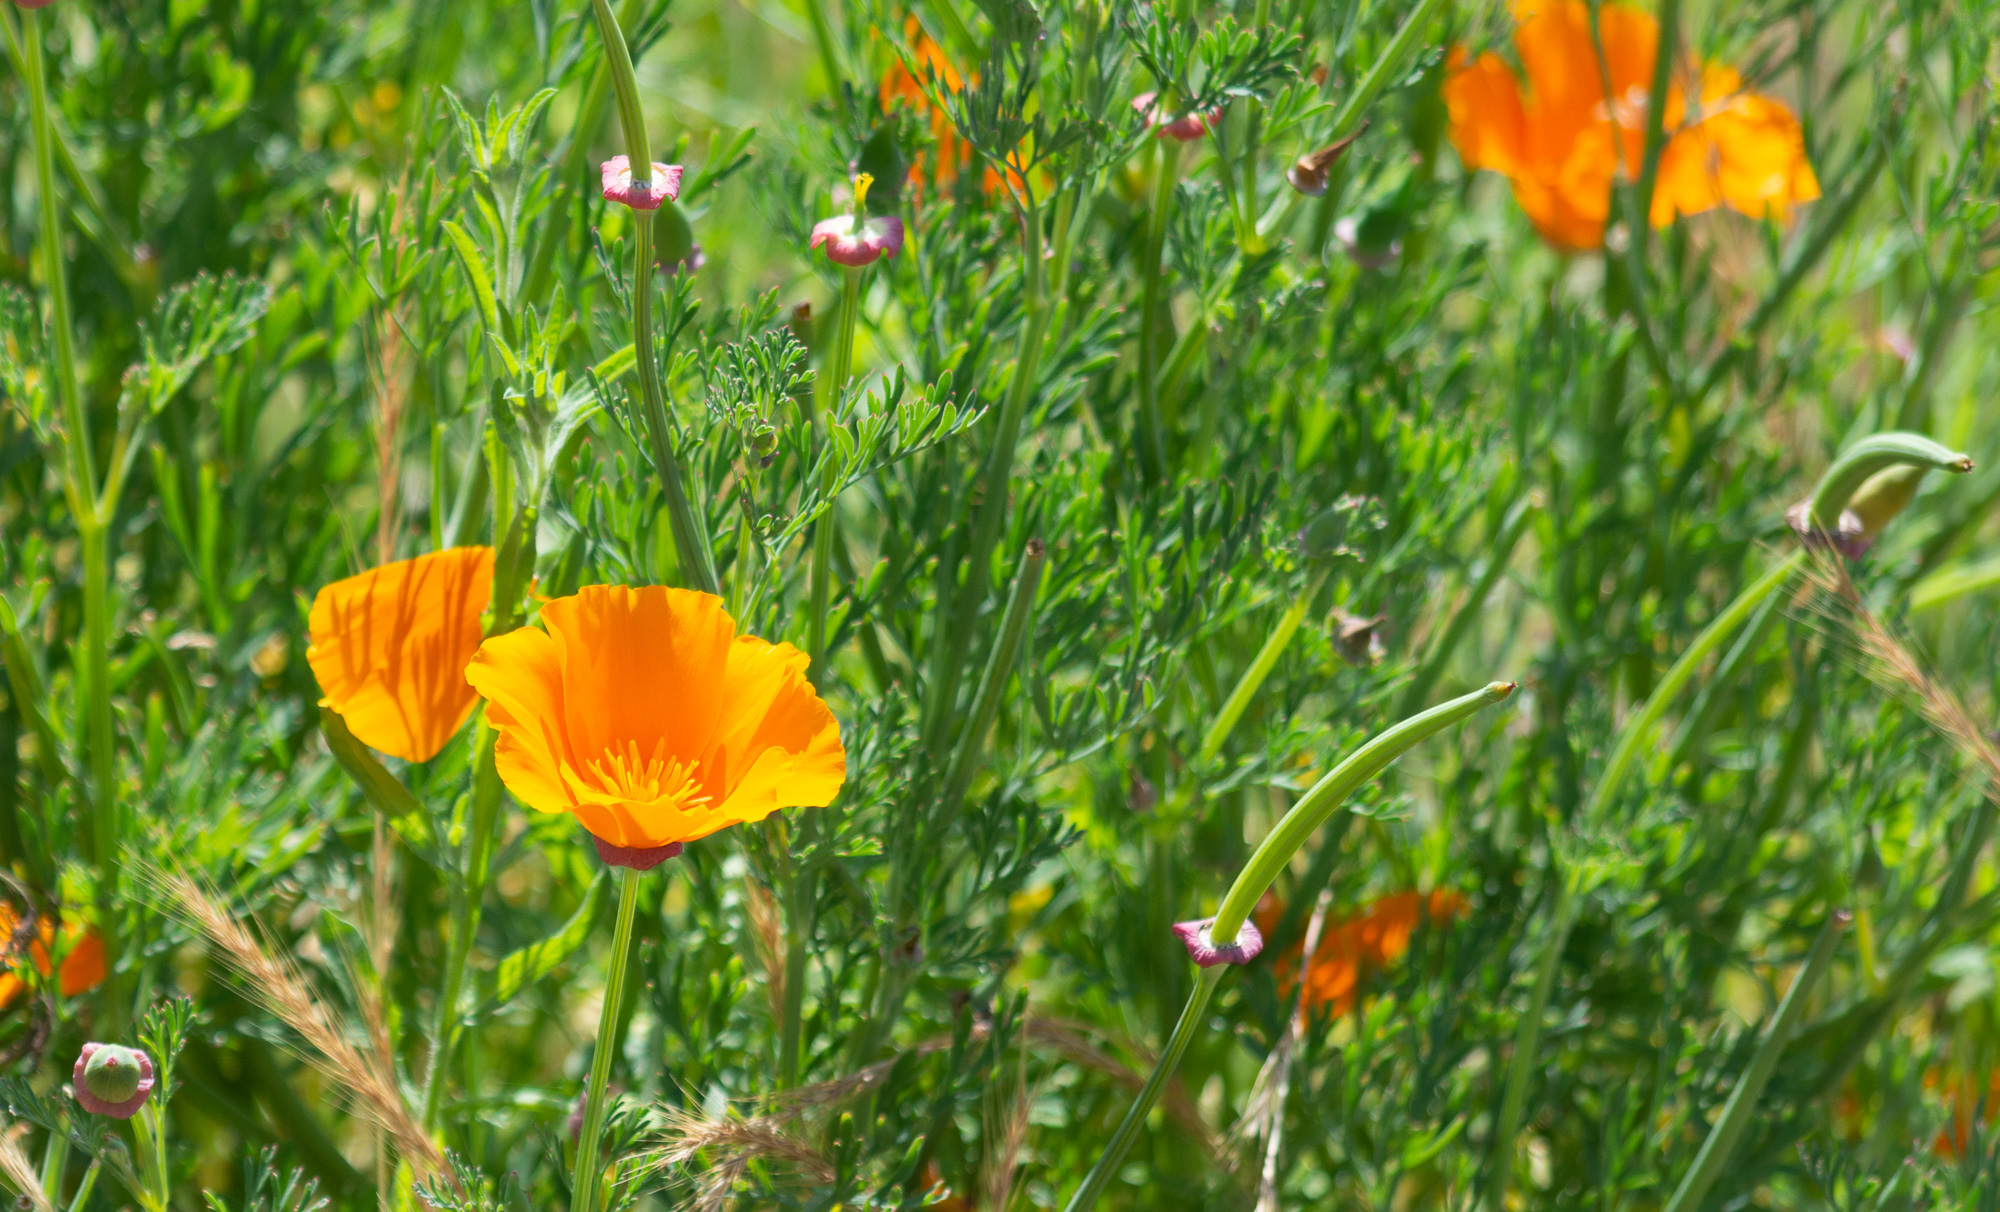 Even the California poppies were out in bloom!